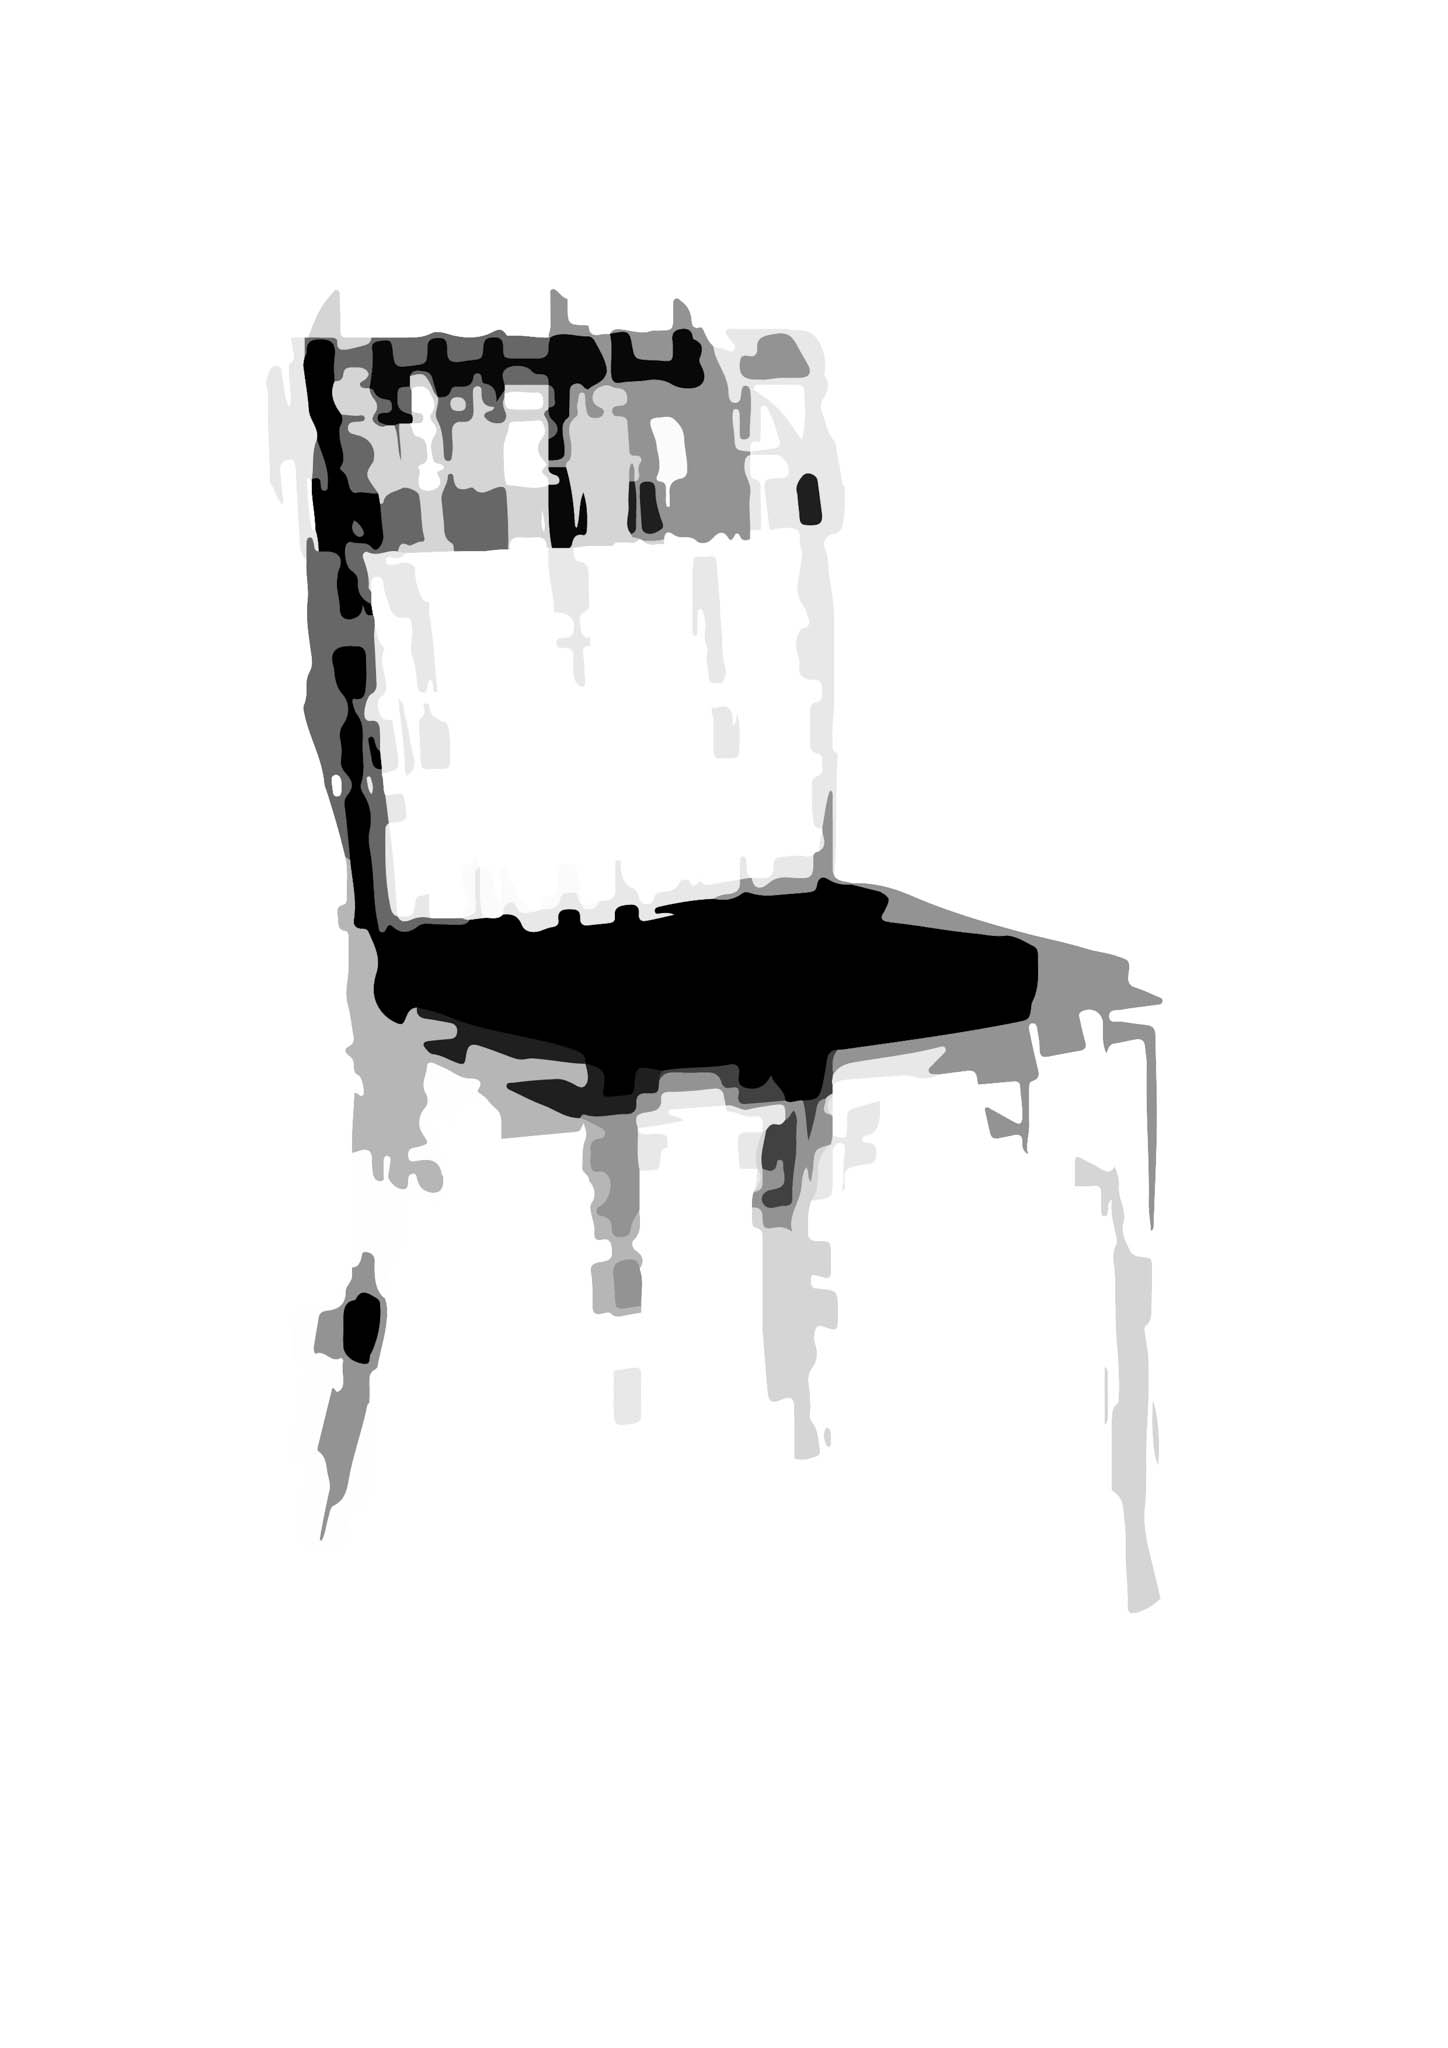 least information needed for recognition software to still recognize the image as a chair